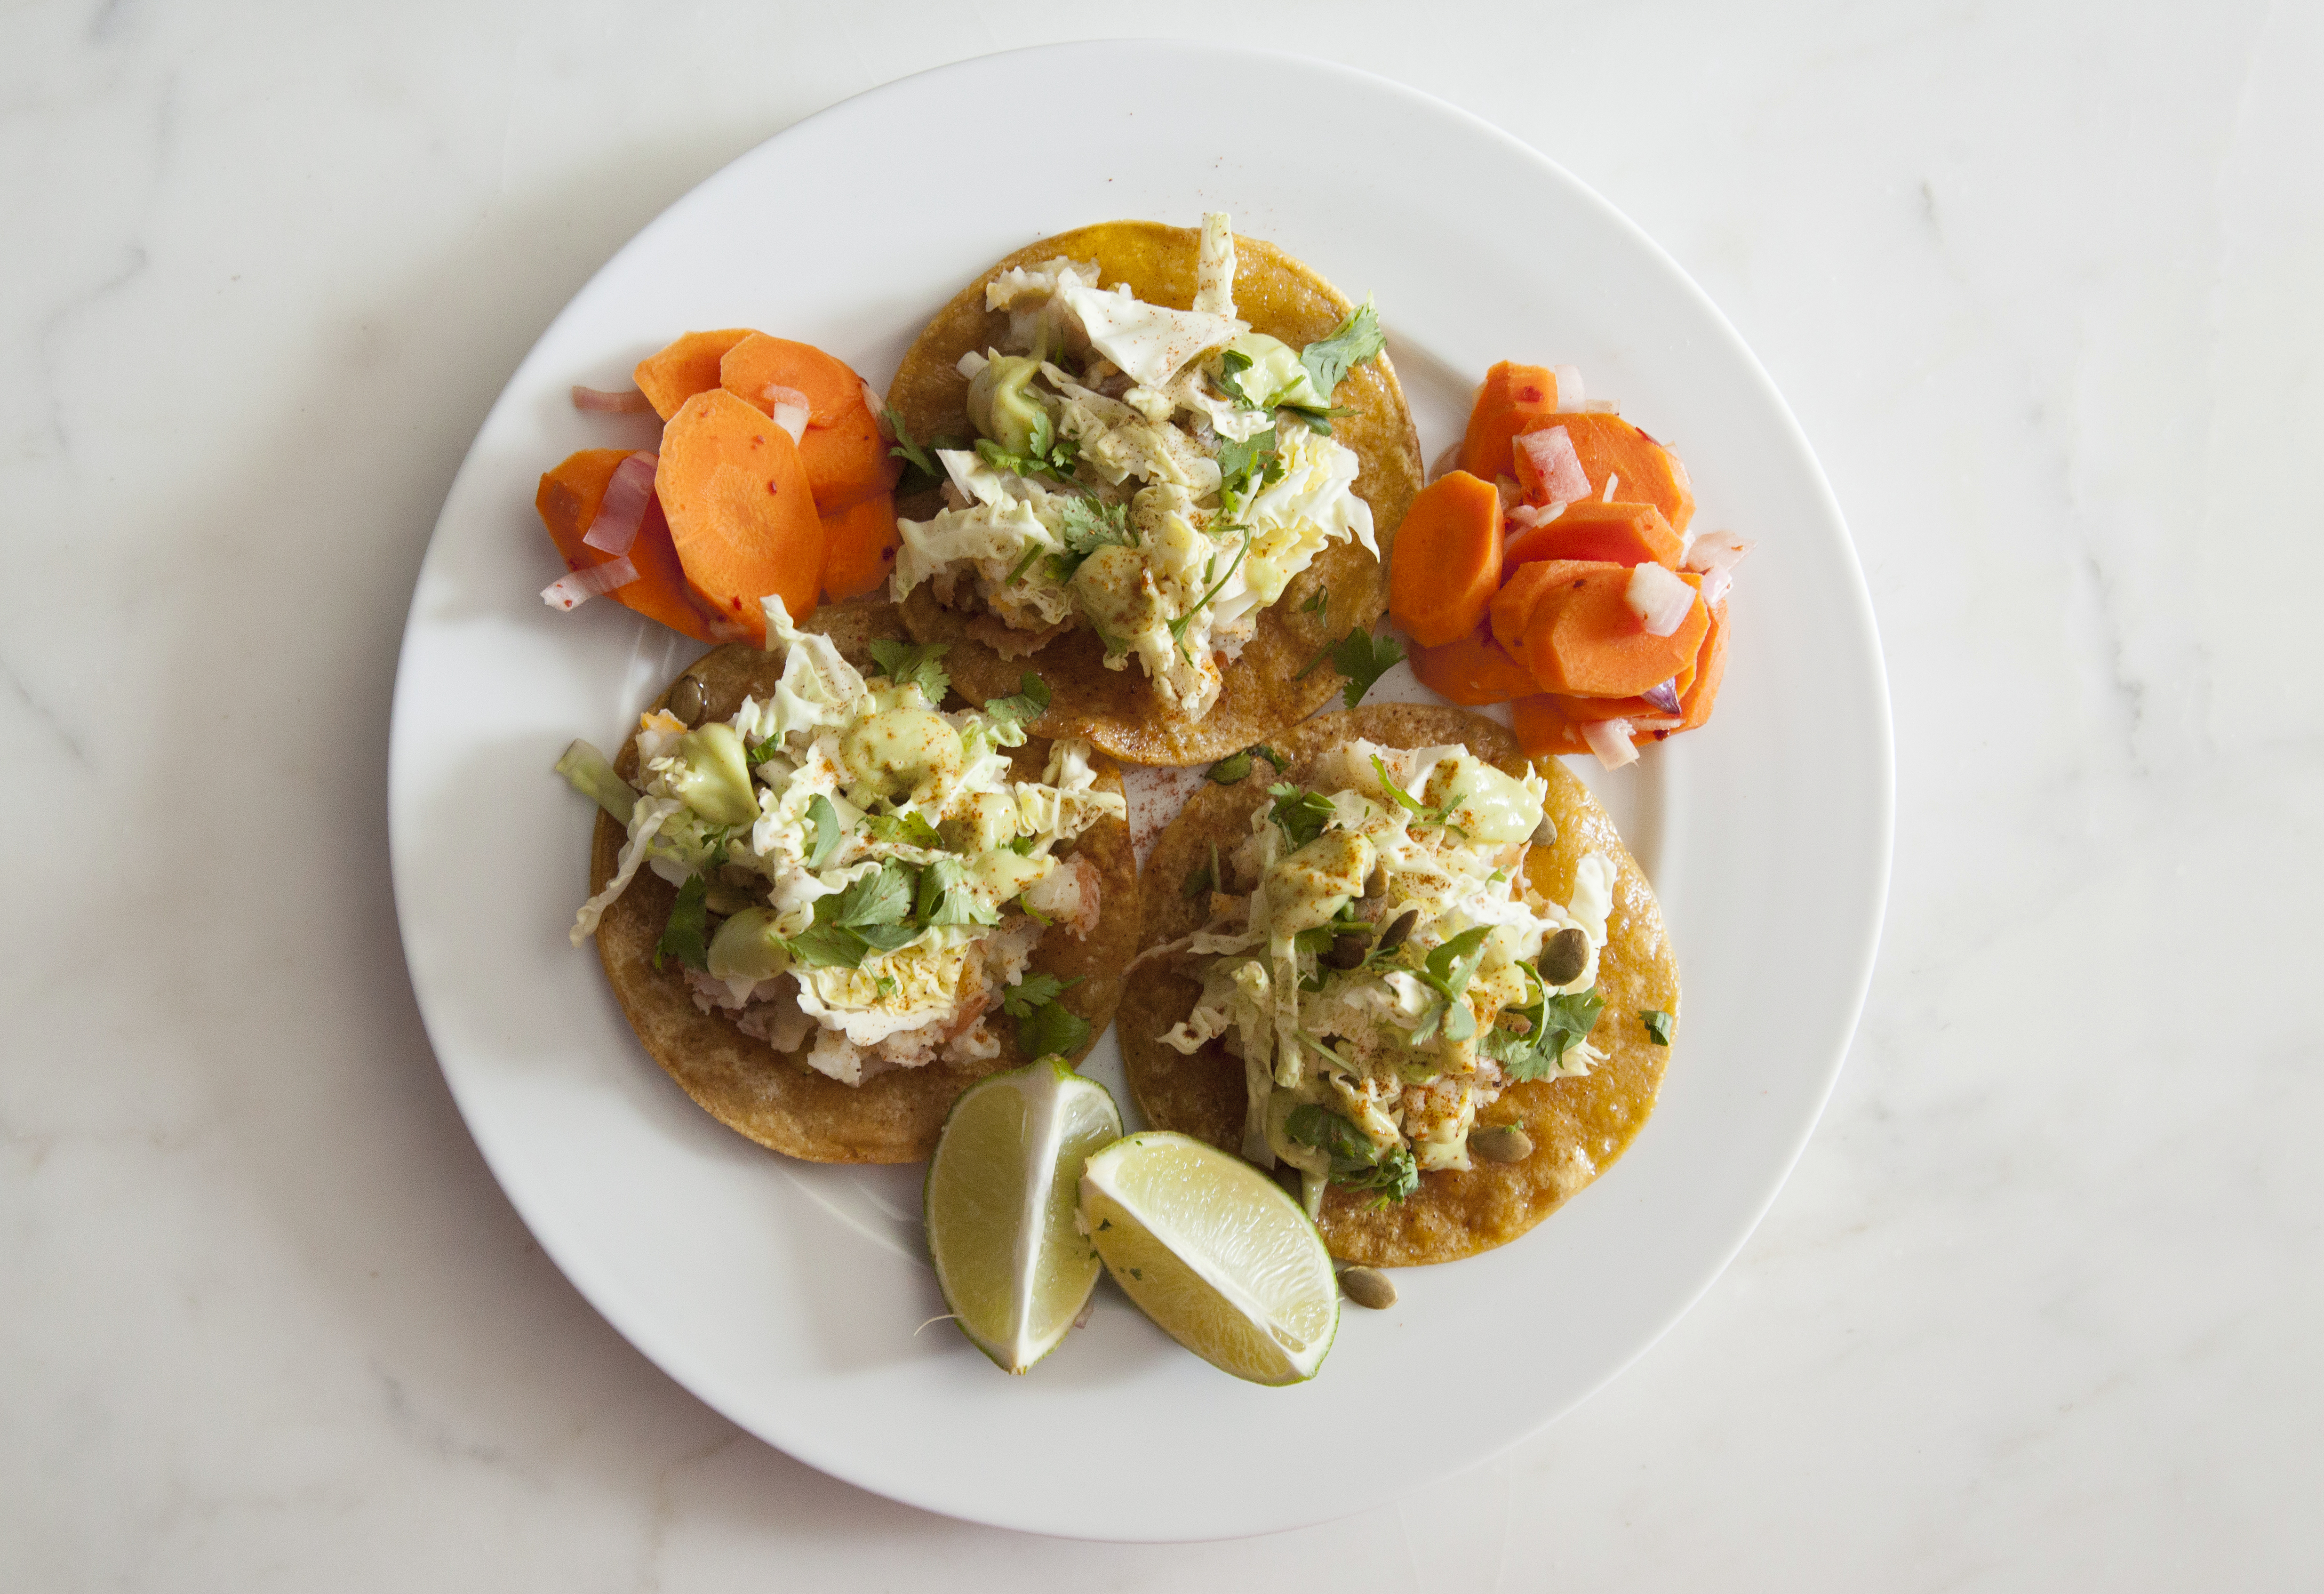 Sun Basket's Tex-Mex tostadas with pickled carrots and avocado crema.